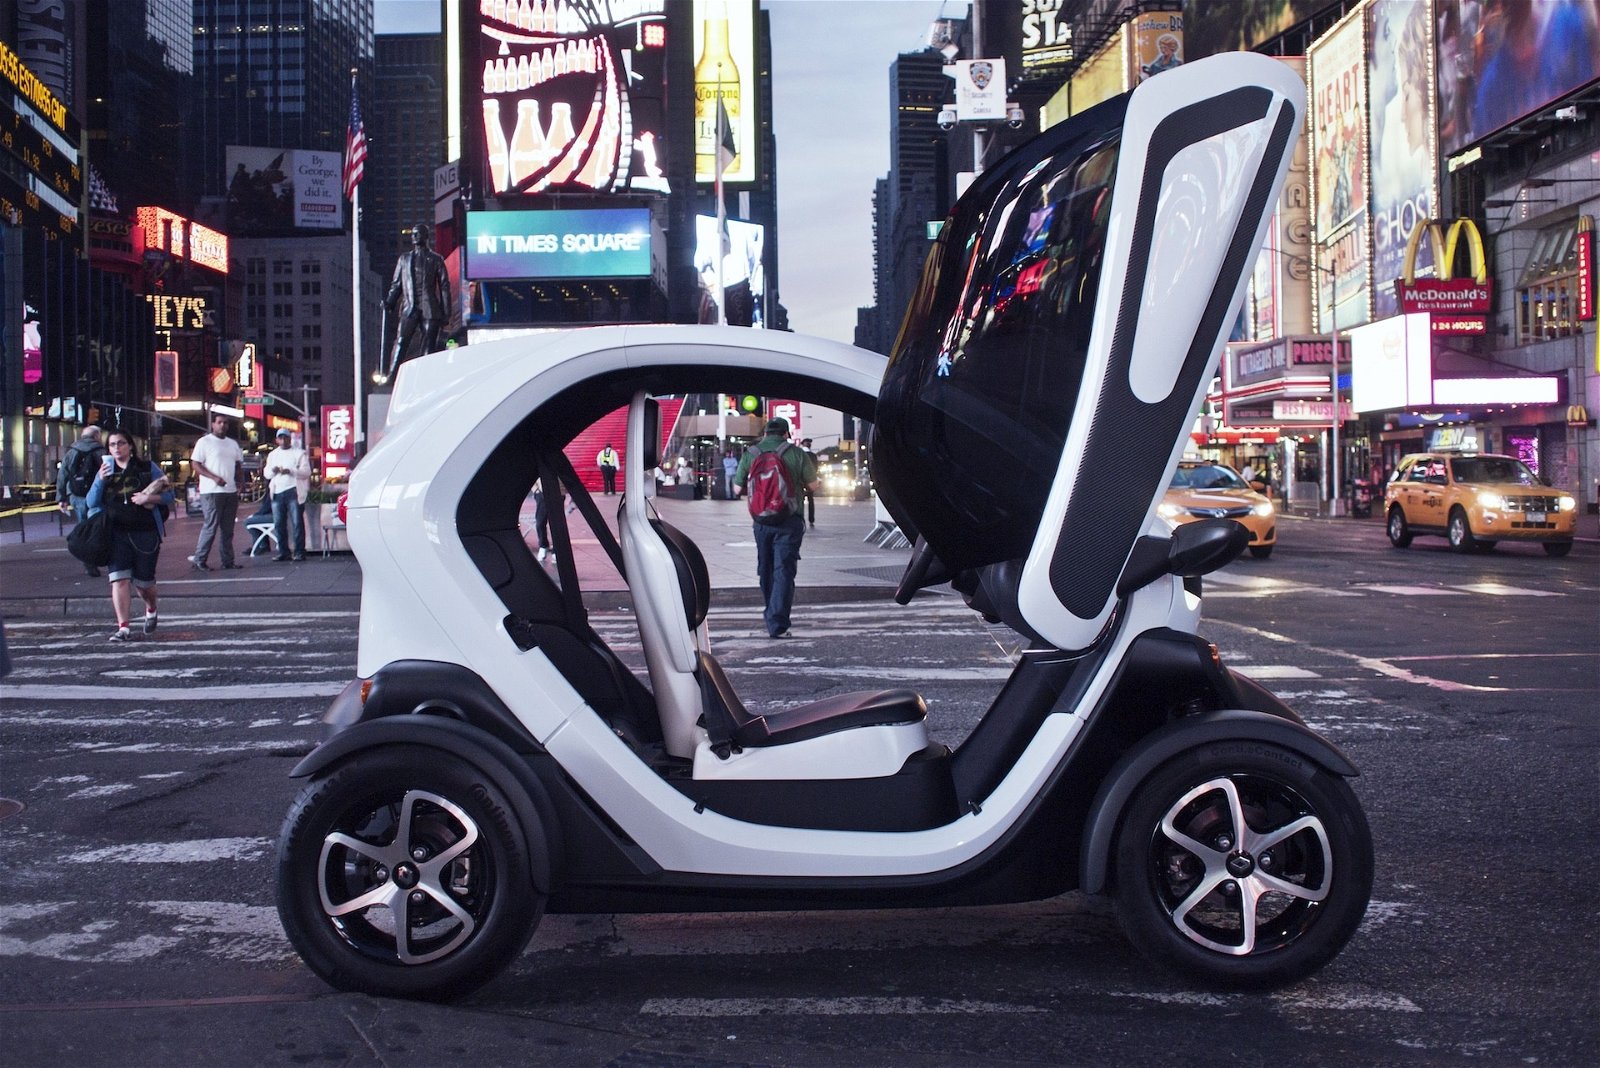 Renault-Twizy-New-York-Times-Square